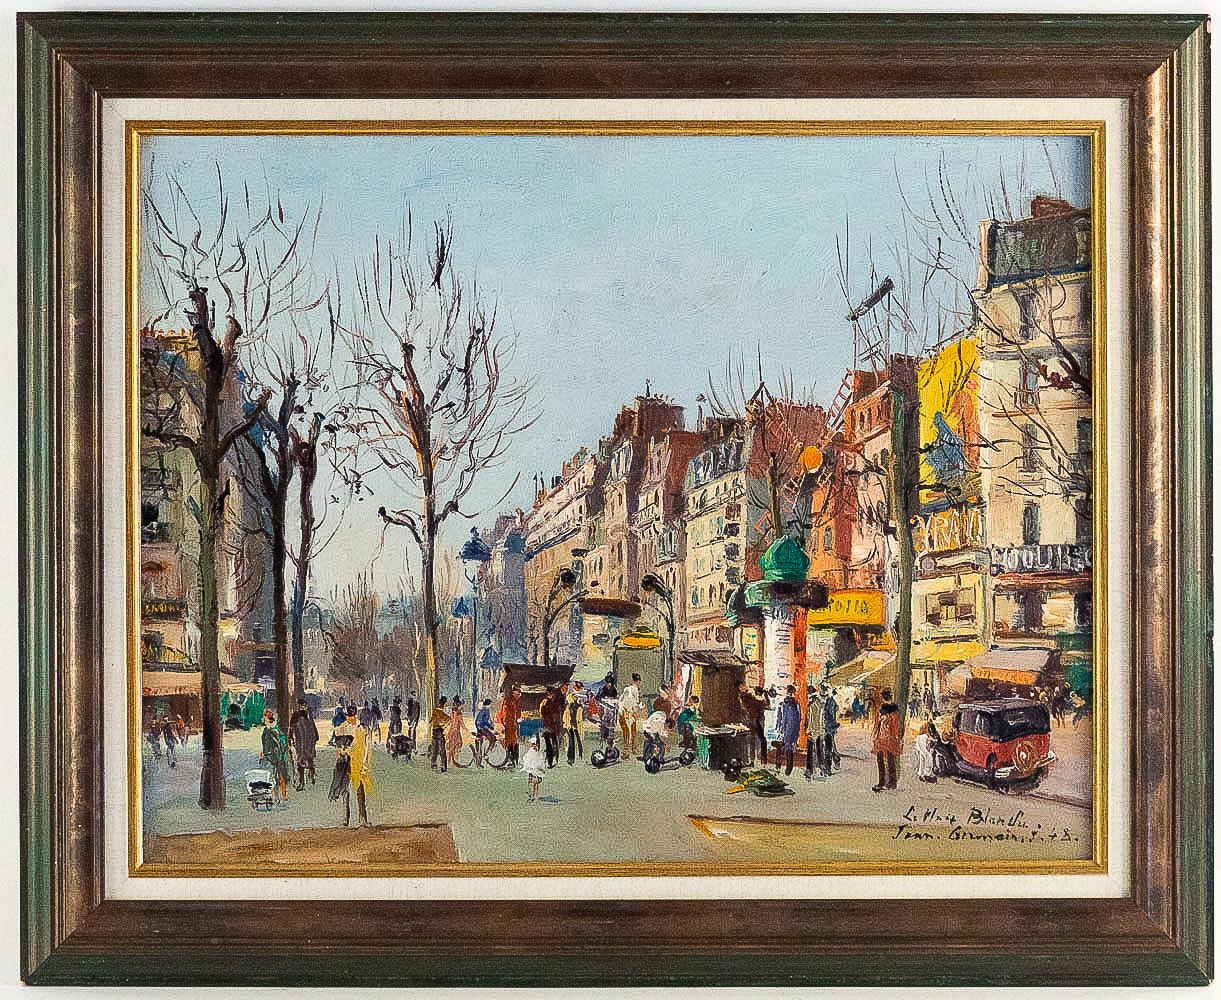 Germain Jean (Jacob), oil on canvas “La Place Blanche Paris”, circa 1948.

A lovely oil on canvas, “La Place Blanche – Paris”, this painting depicts perfectly The Paris of 1950s. 

Measurements unframed: H 20.86 In. - W 26.77 In.
Measurements